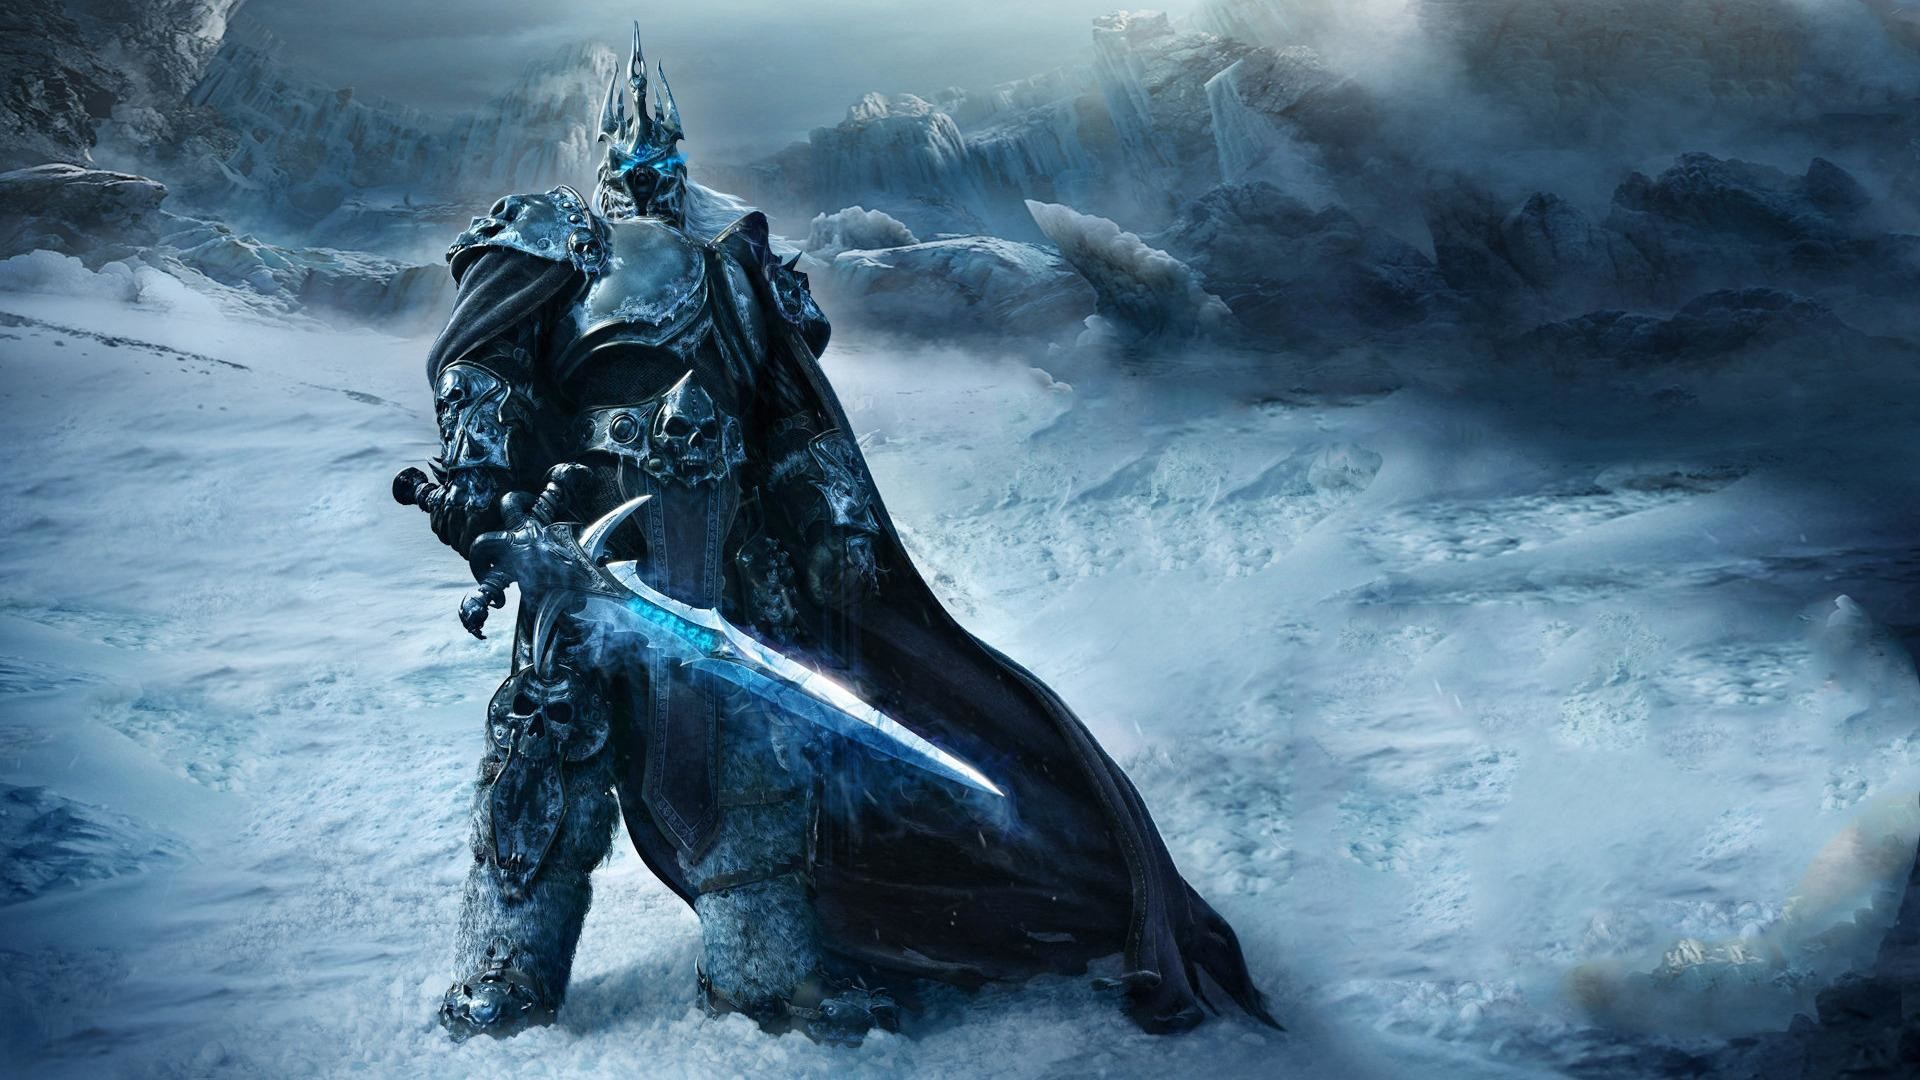 1920x1080 Wallpaper game, warrior, world of warcraft, wrath of the lich king